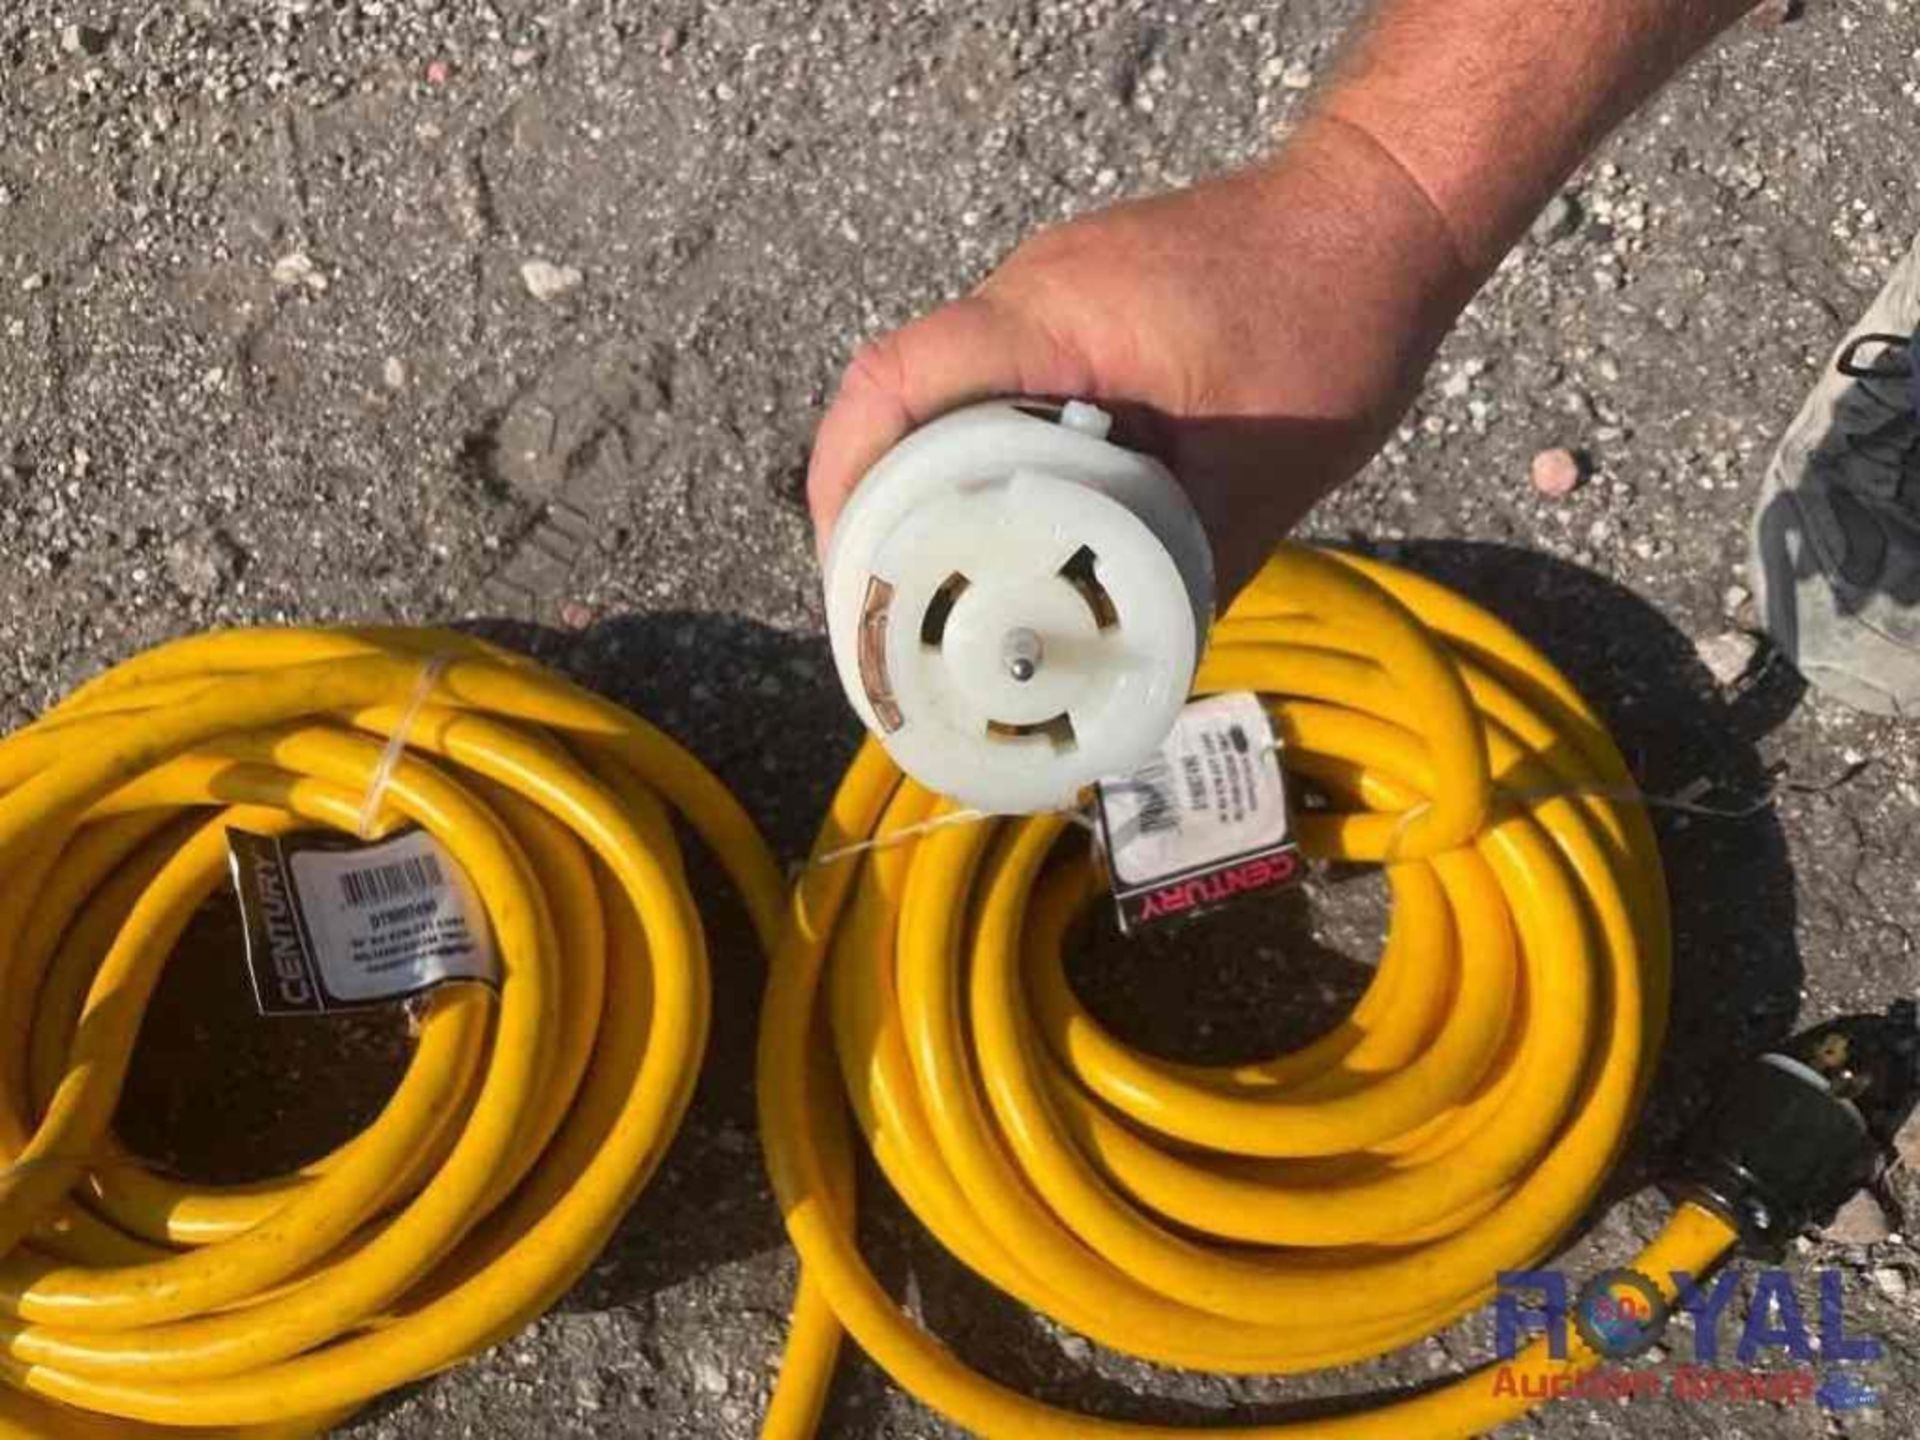 2-Century Wire Power Cords, Yellow, 50 Ft 8/4 Cable - Image 6 of 7